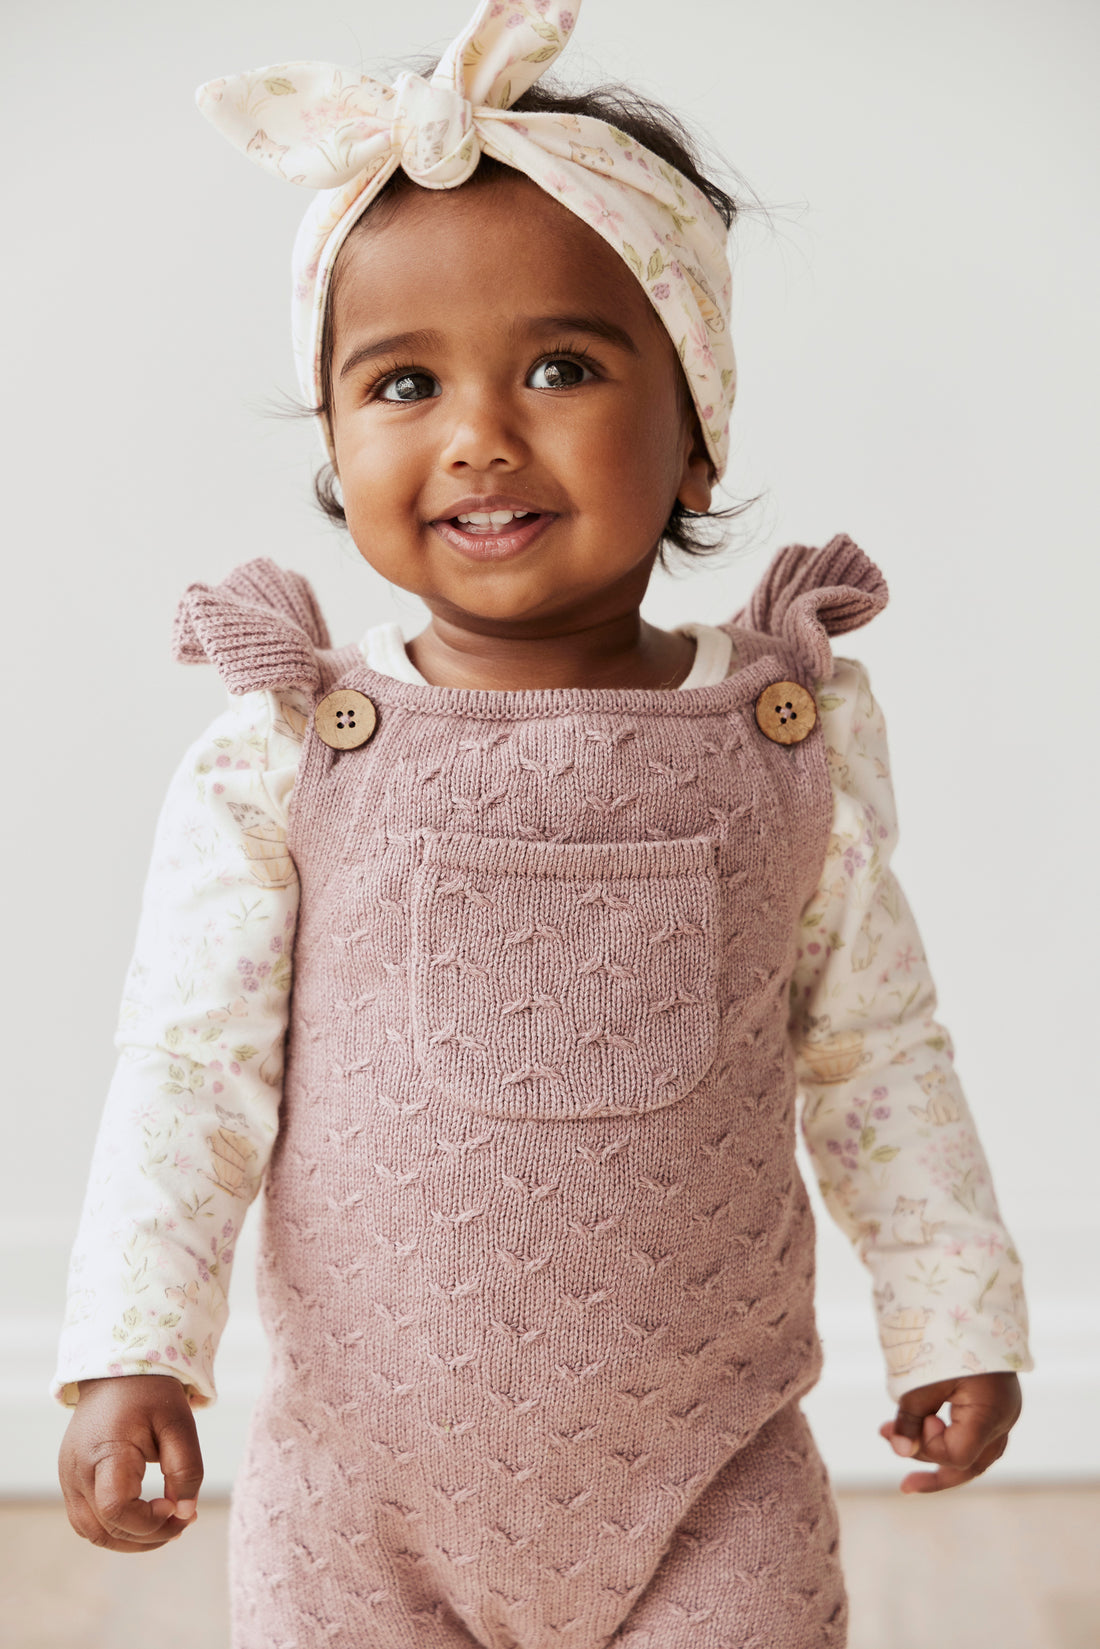 Mia Knitted Onepiece - Vintage Mauve Marle Childrens Onepiece from Jamie Kay NZ